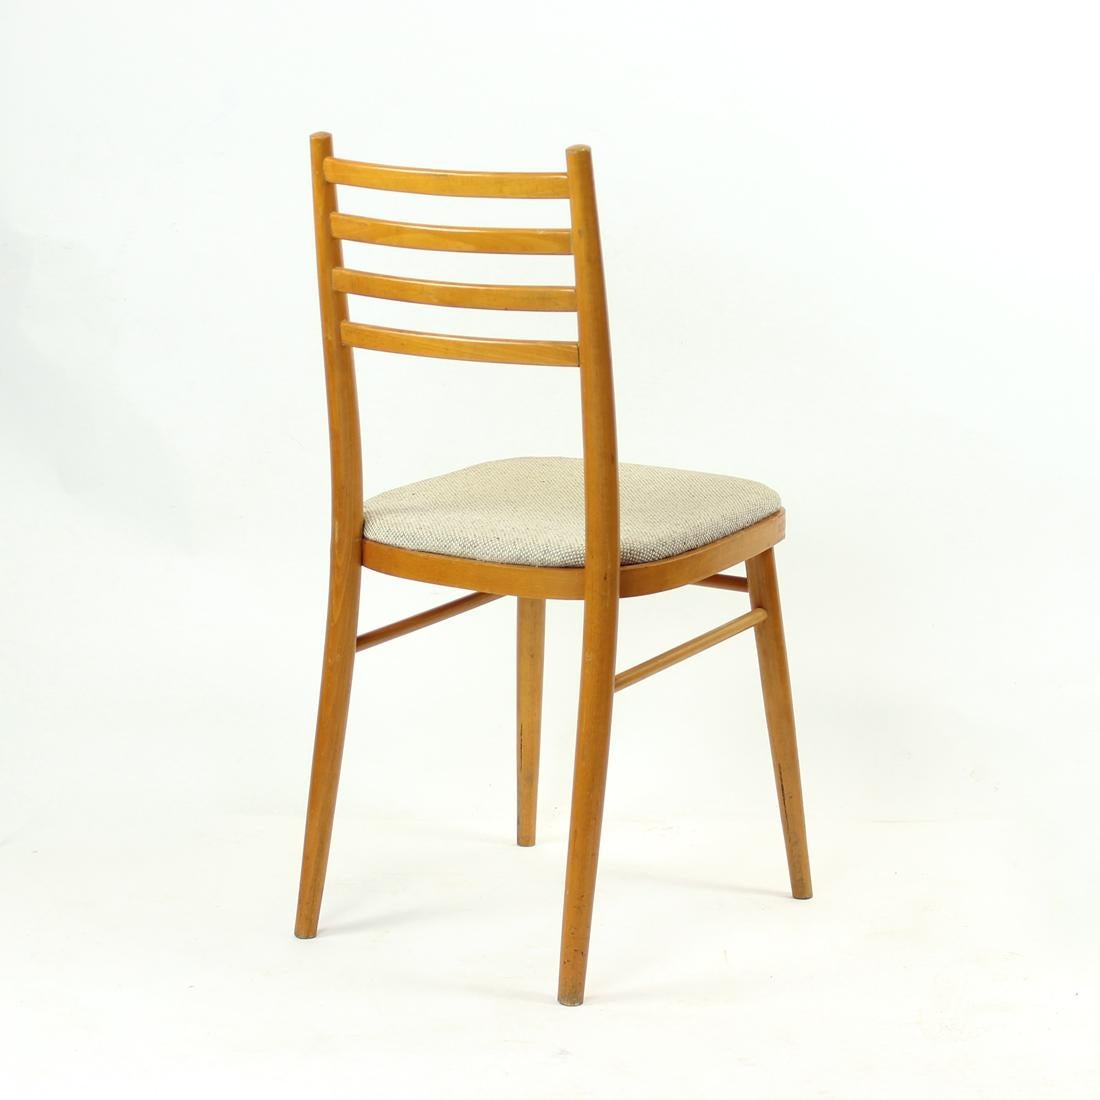 Mid-20th Century Midcentury Chair in Blond Wood, Czechoslovakia, 1960s For Sale